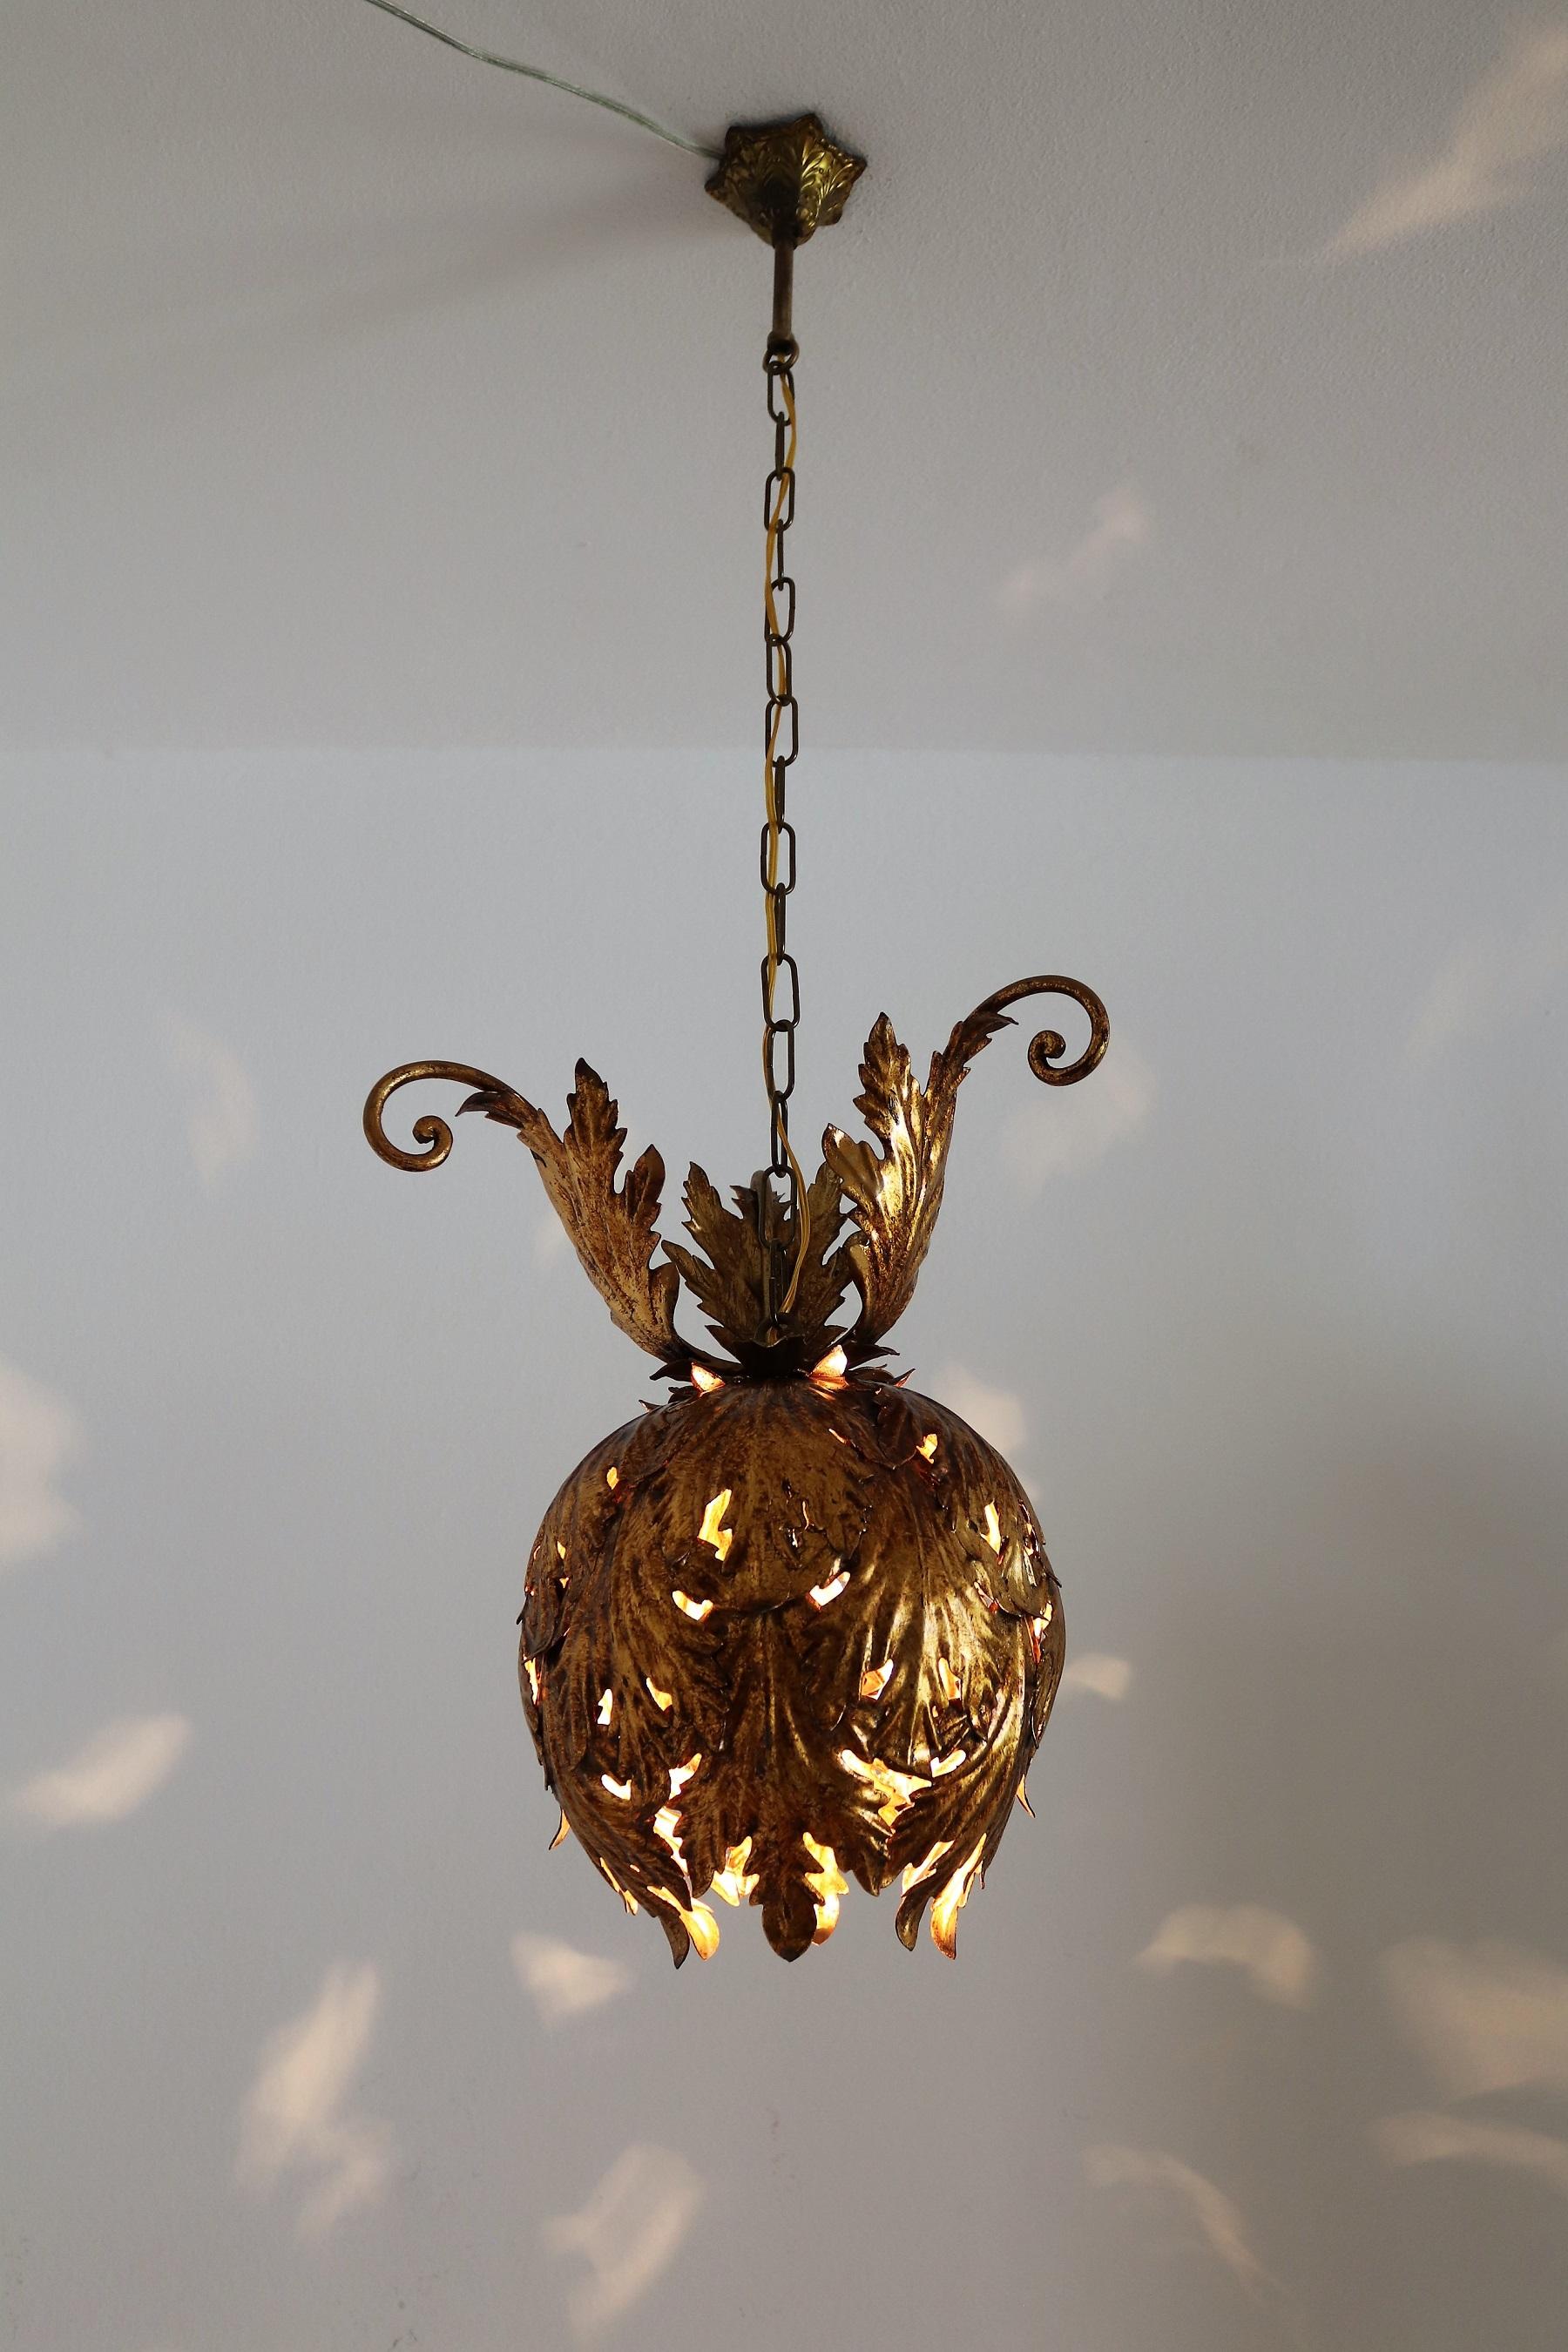 Italian Midcentury Gilt Metal Pendant Lamp with Leaves for Hans Kögl, 1960s For Sale 5